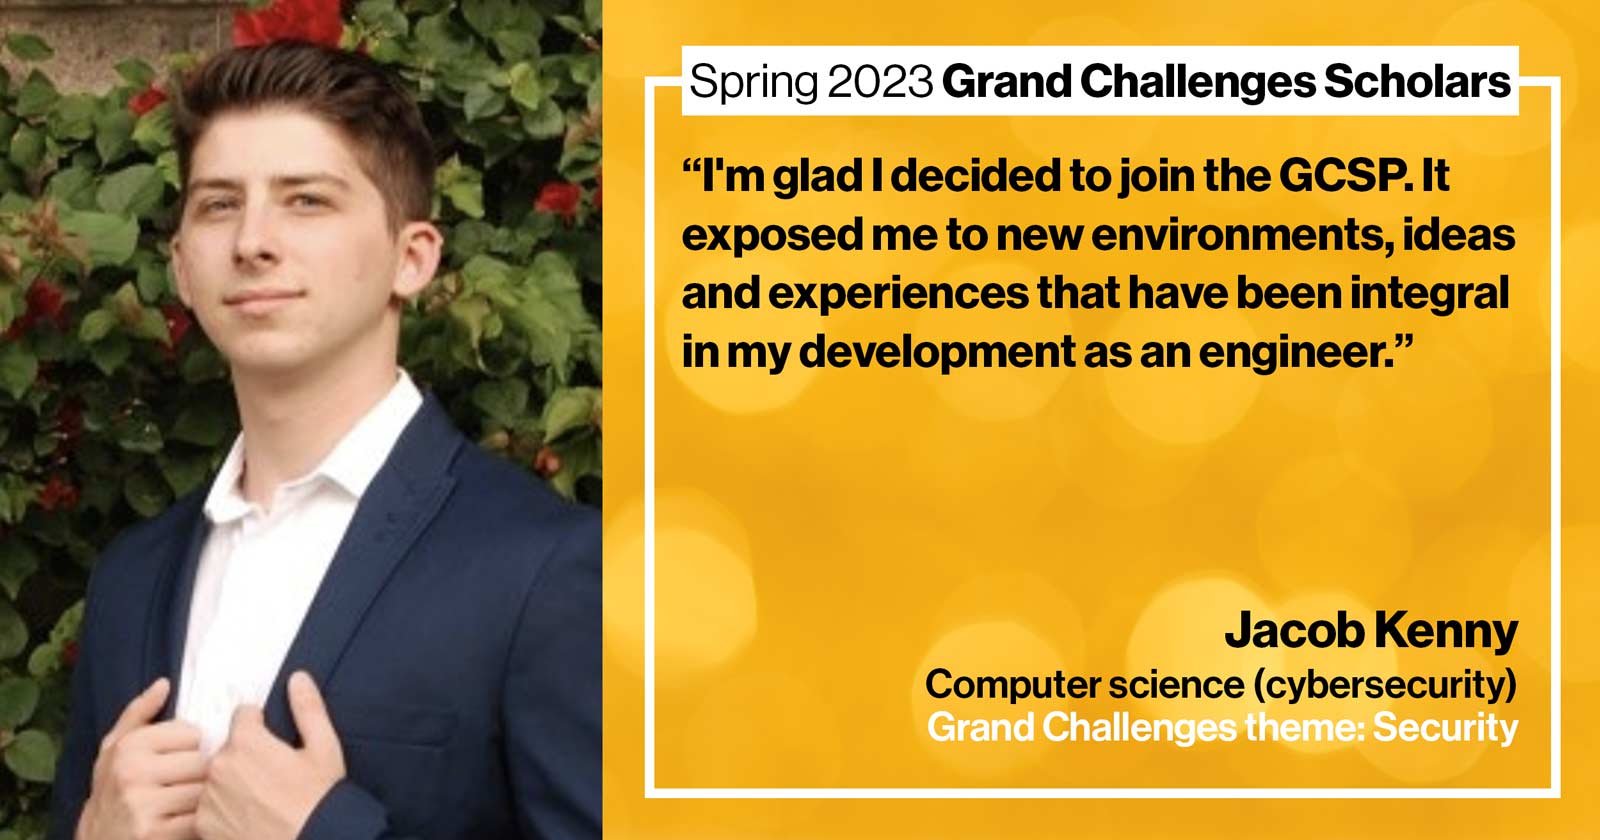 "Jacob Kenny Computer science (cybersecurity) Grand Challenge: Security Quote: “I'm glad I decided to join the GCSP -- it exposed me to new environments, ideas, and experiences that have been integral in my development as an engineer.”"